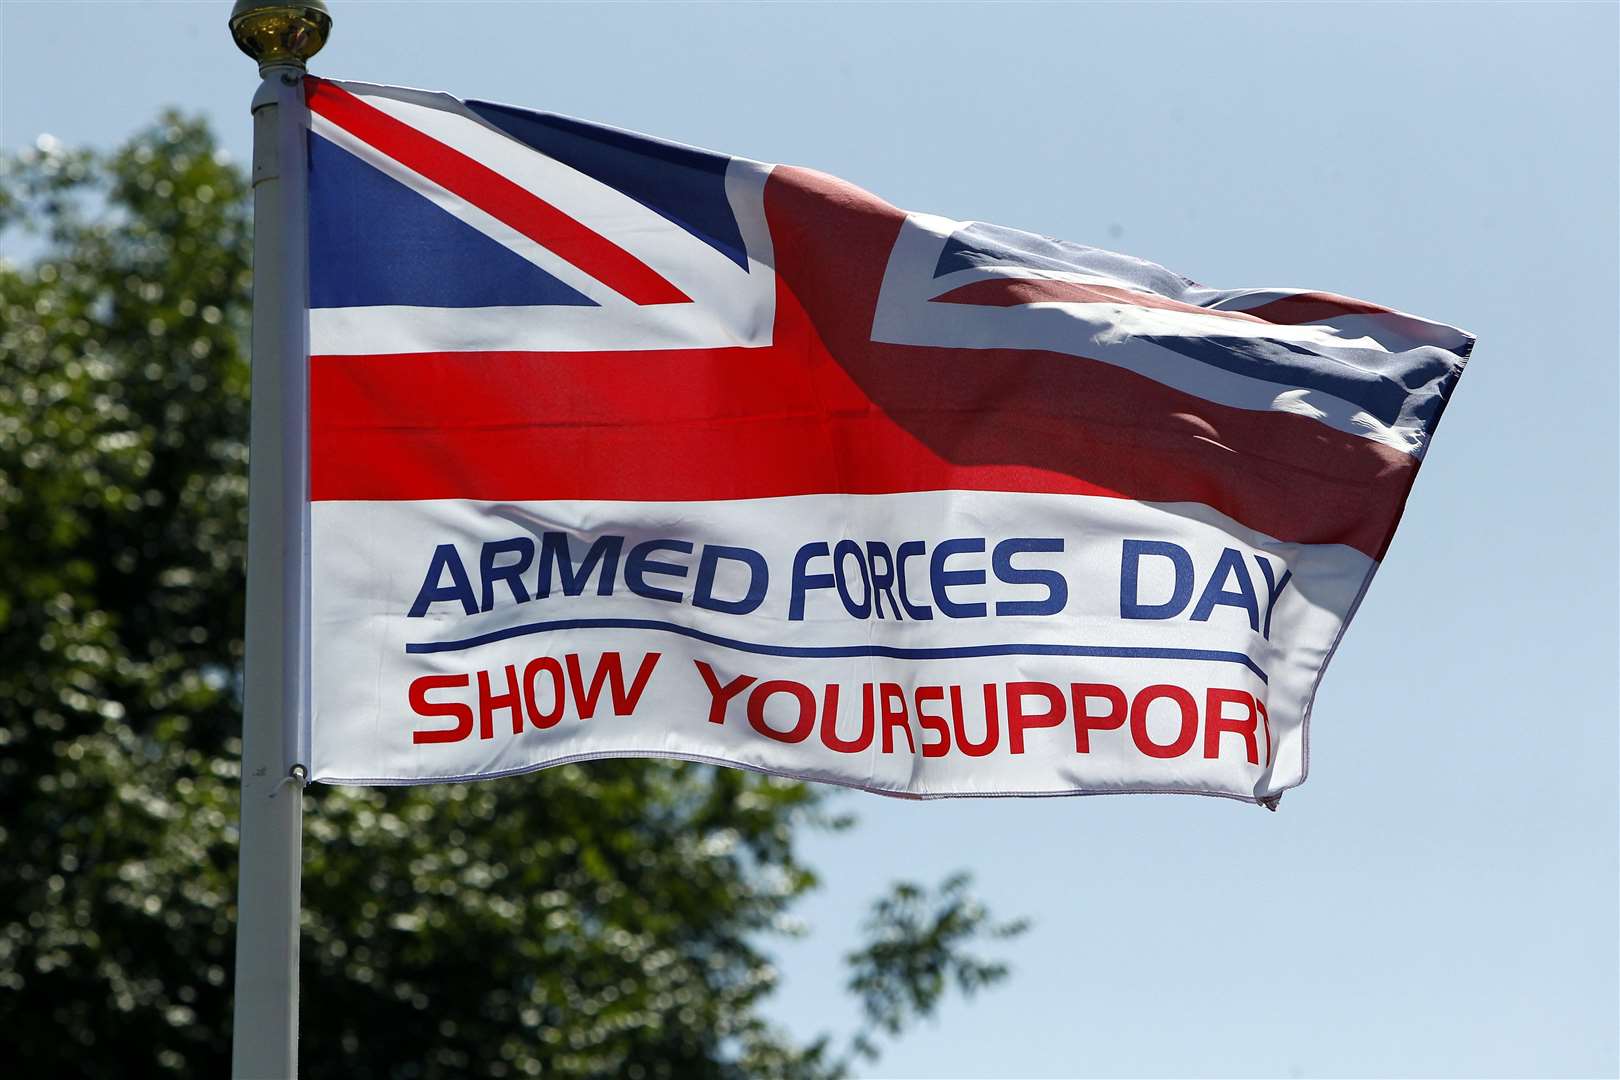 Armed Forces Day events are taking place on both Saturday and Sunday